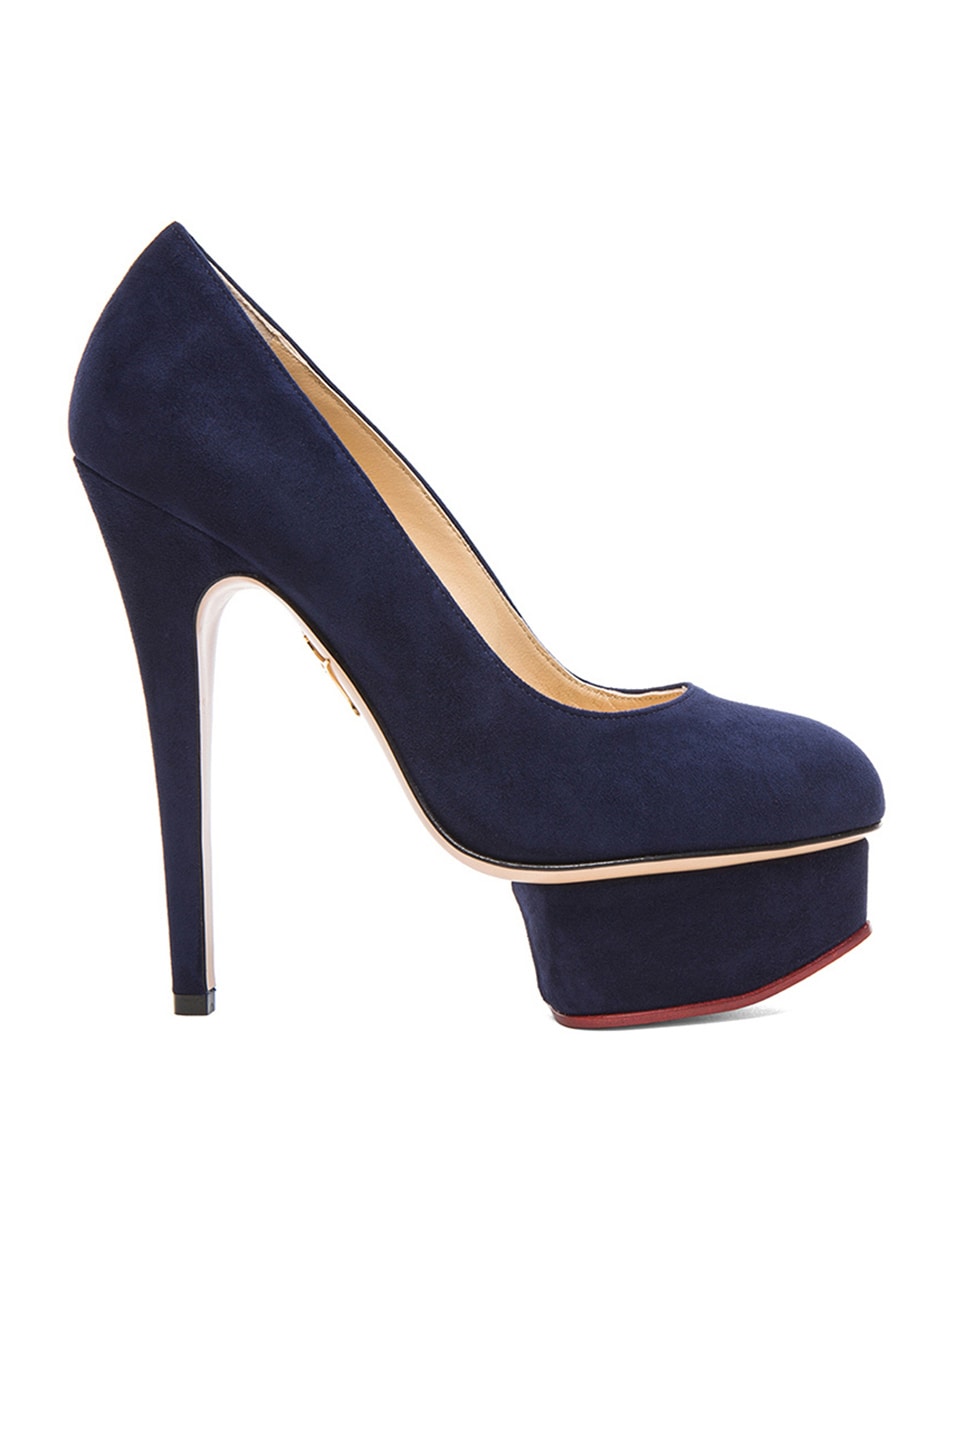 Image 1 of Charlotte Olympia Dolly Suede Pumps in Navy